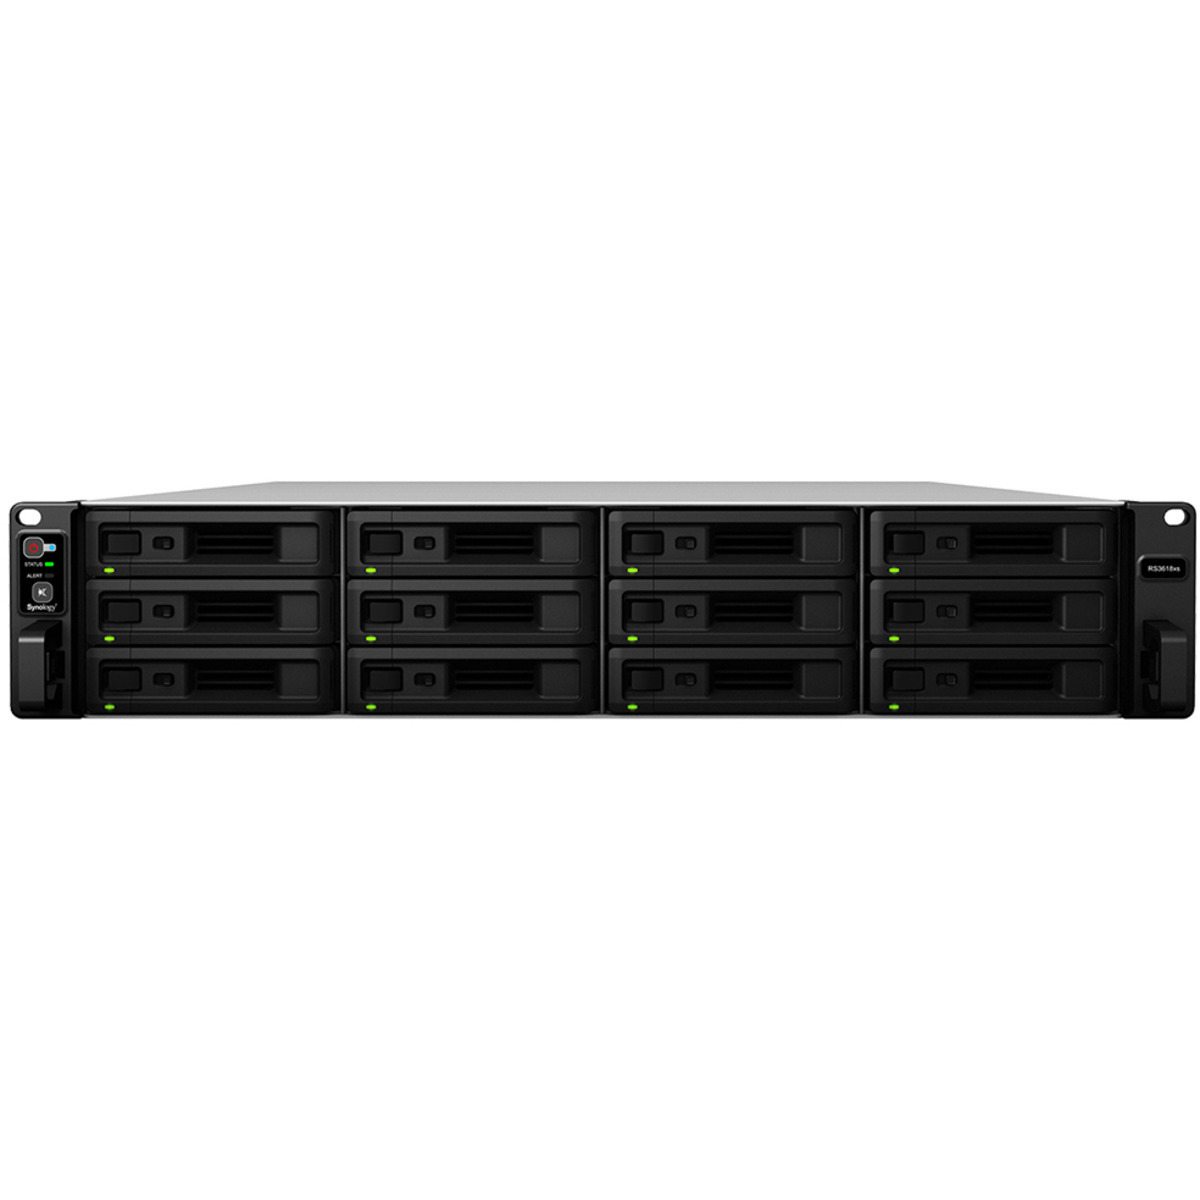 Synology RackStation RS3618xs 200tb 12-Bay RackMount Large Business / Enterprise NAS - Network Attached Storage Device 10x20tb Seagate EXOS X20 ST20000NM007D 3.5 7200rpm SATA 6Gb/s HDD ENTERPRISE Class Drives Installed - Burn-In Tested RackStation RS3618xs